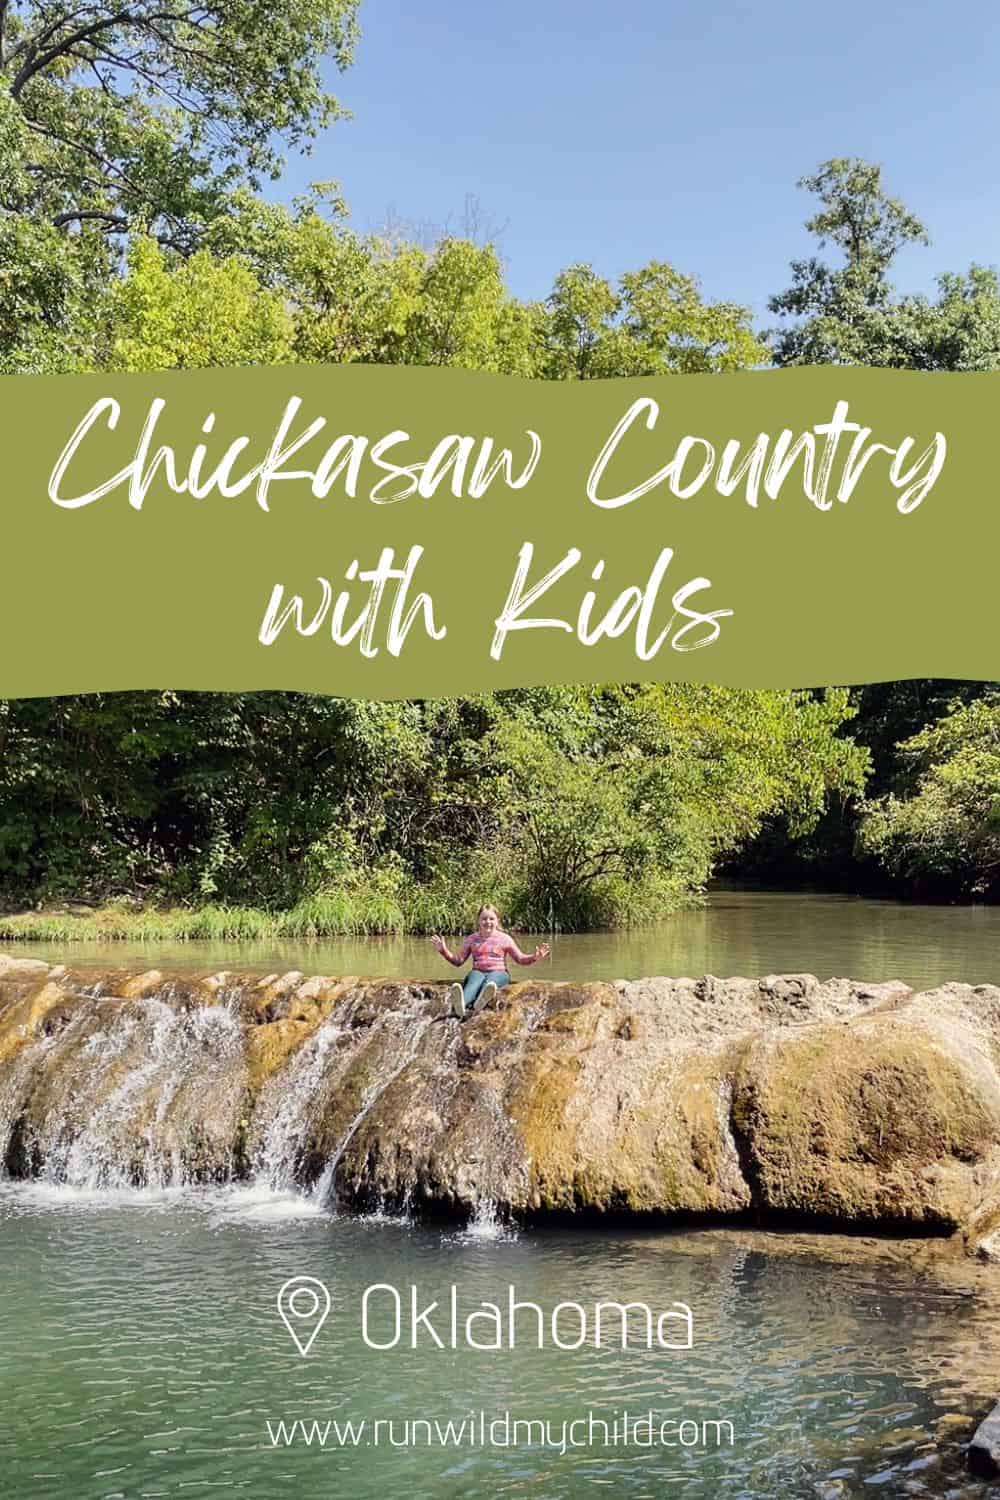 Chickasaw Country with Kids - Oklahoma Outdoor Adventures